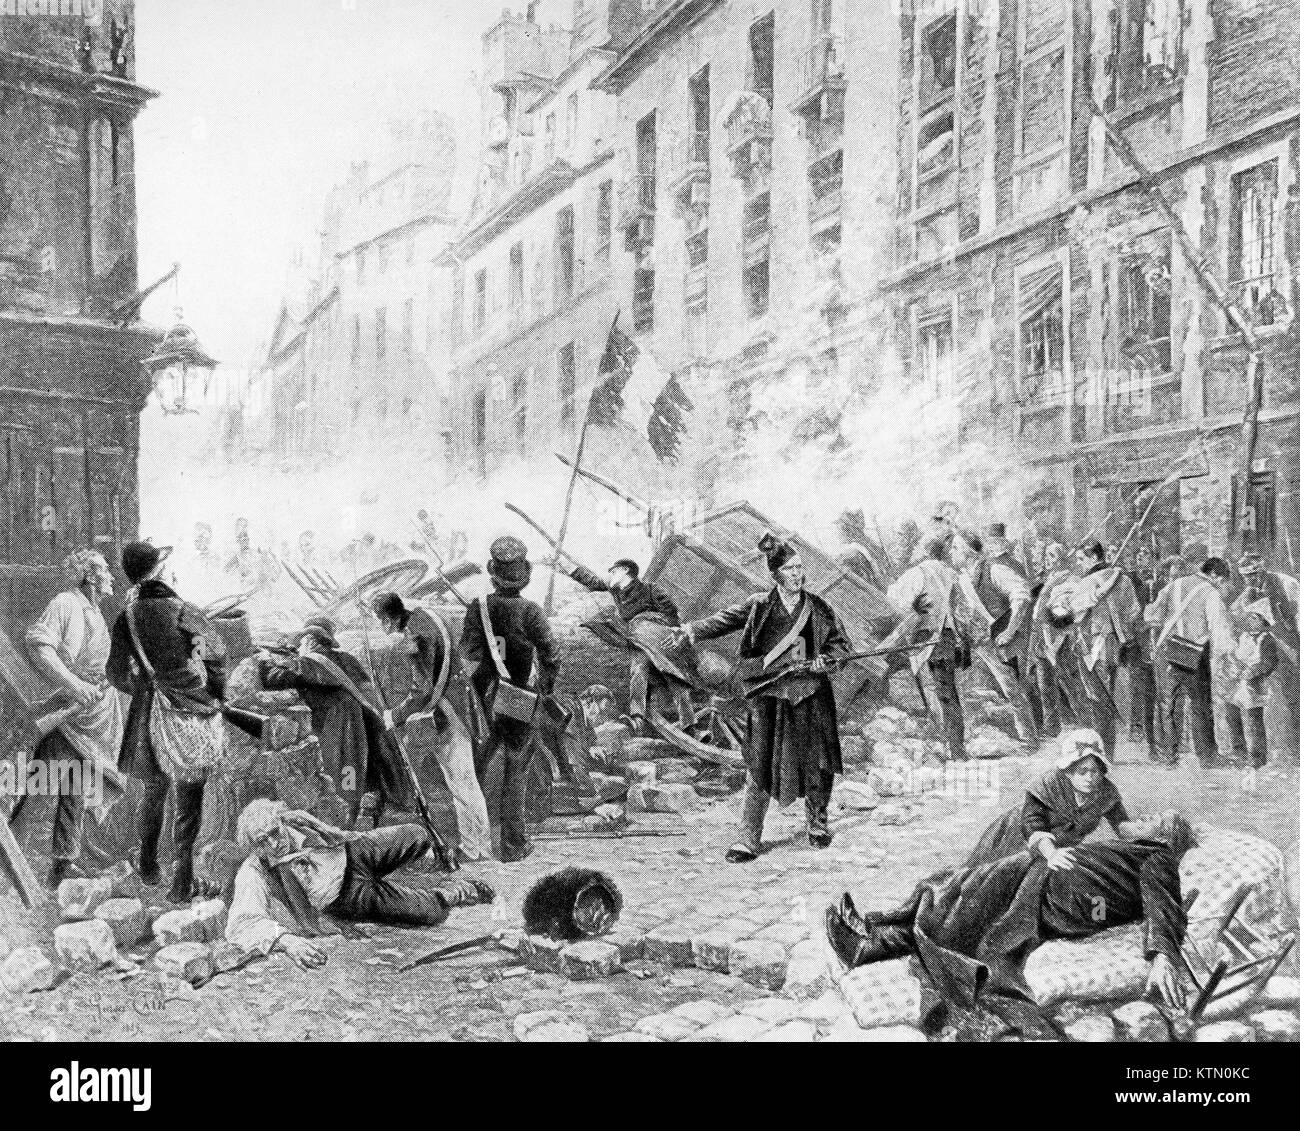 Halftone image of an engraving of a barricade at the French Revolution of 1830. Based upon the painting by Cain. Stock Photo